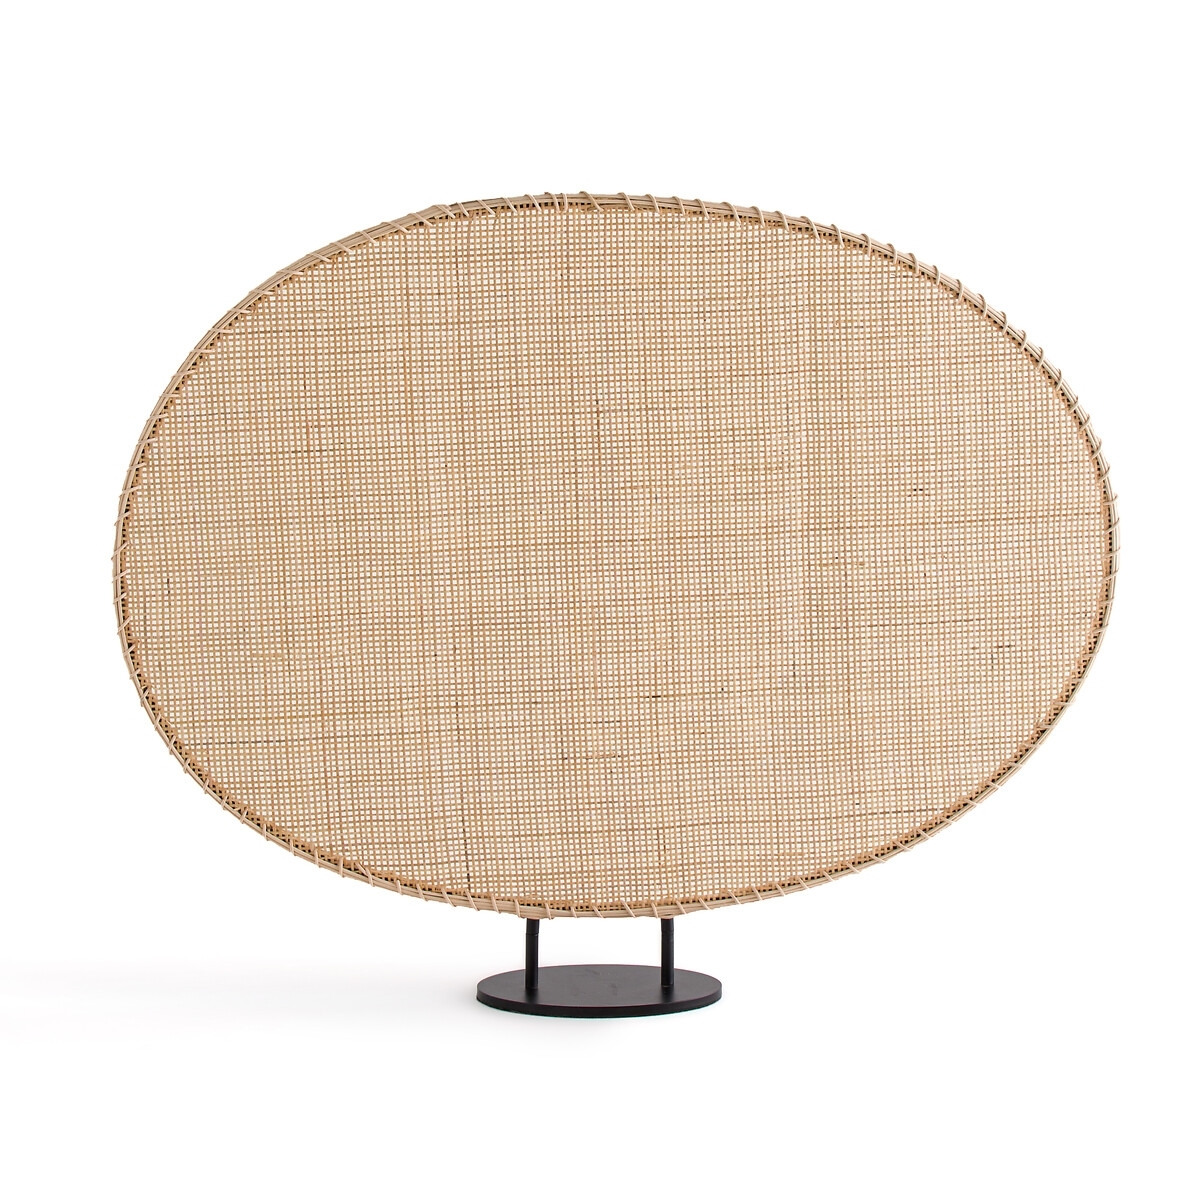 Canopée Woven Rattan Room Divider, designed by E.Gallina - image 1